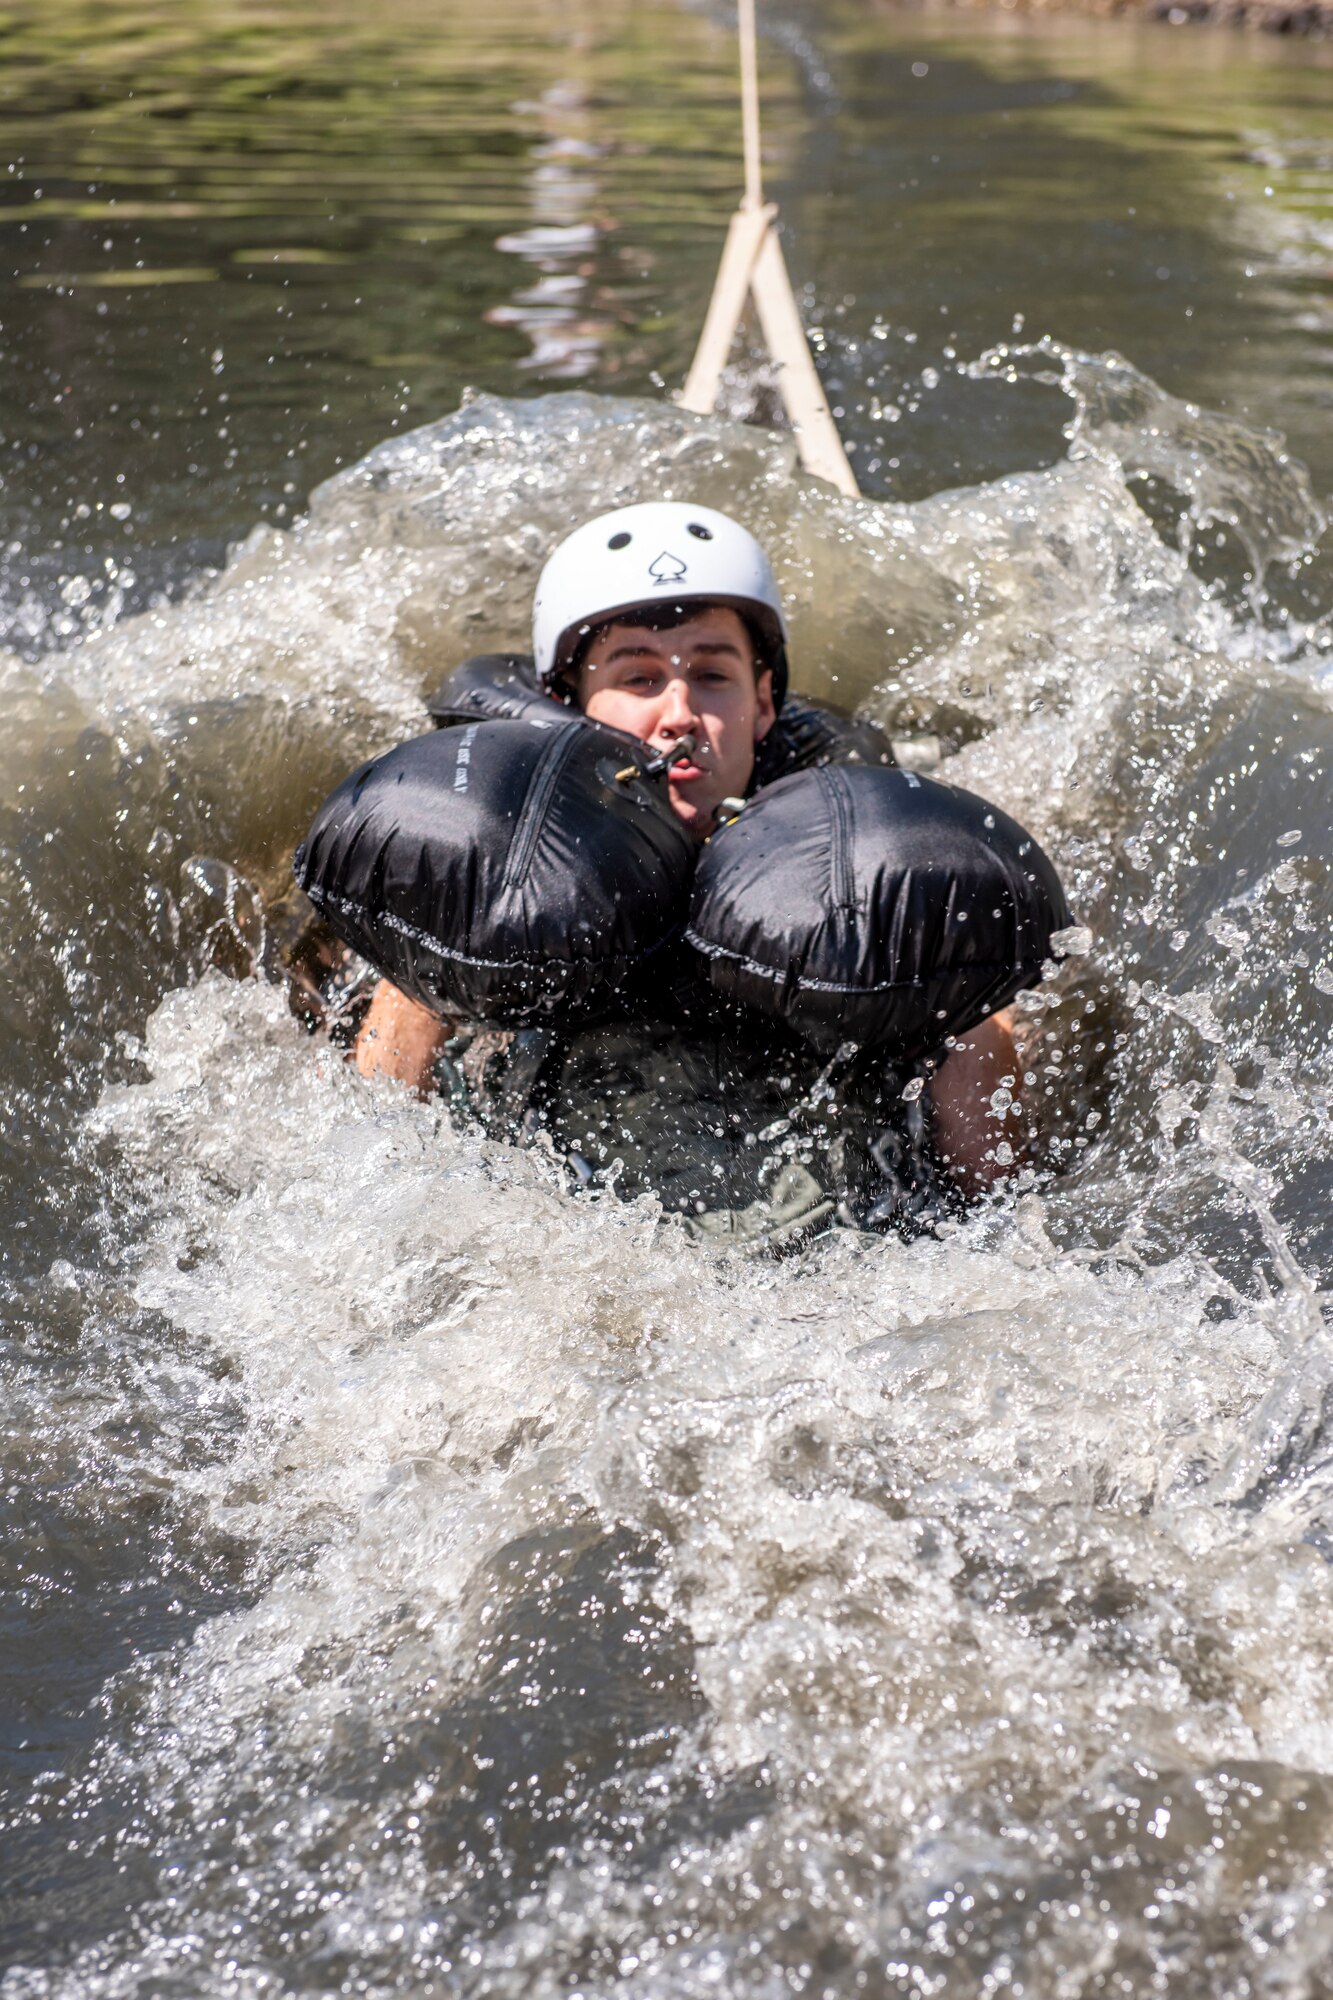 U.S. Air Force Capt. Robert Lowery, an F-16 fighter pilot assigned to the Ohio National Guard's 180th Fighter Wing, is dragged through the water during water survival training in Waterville, Ohio, Aug. 8, 2020.